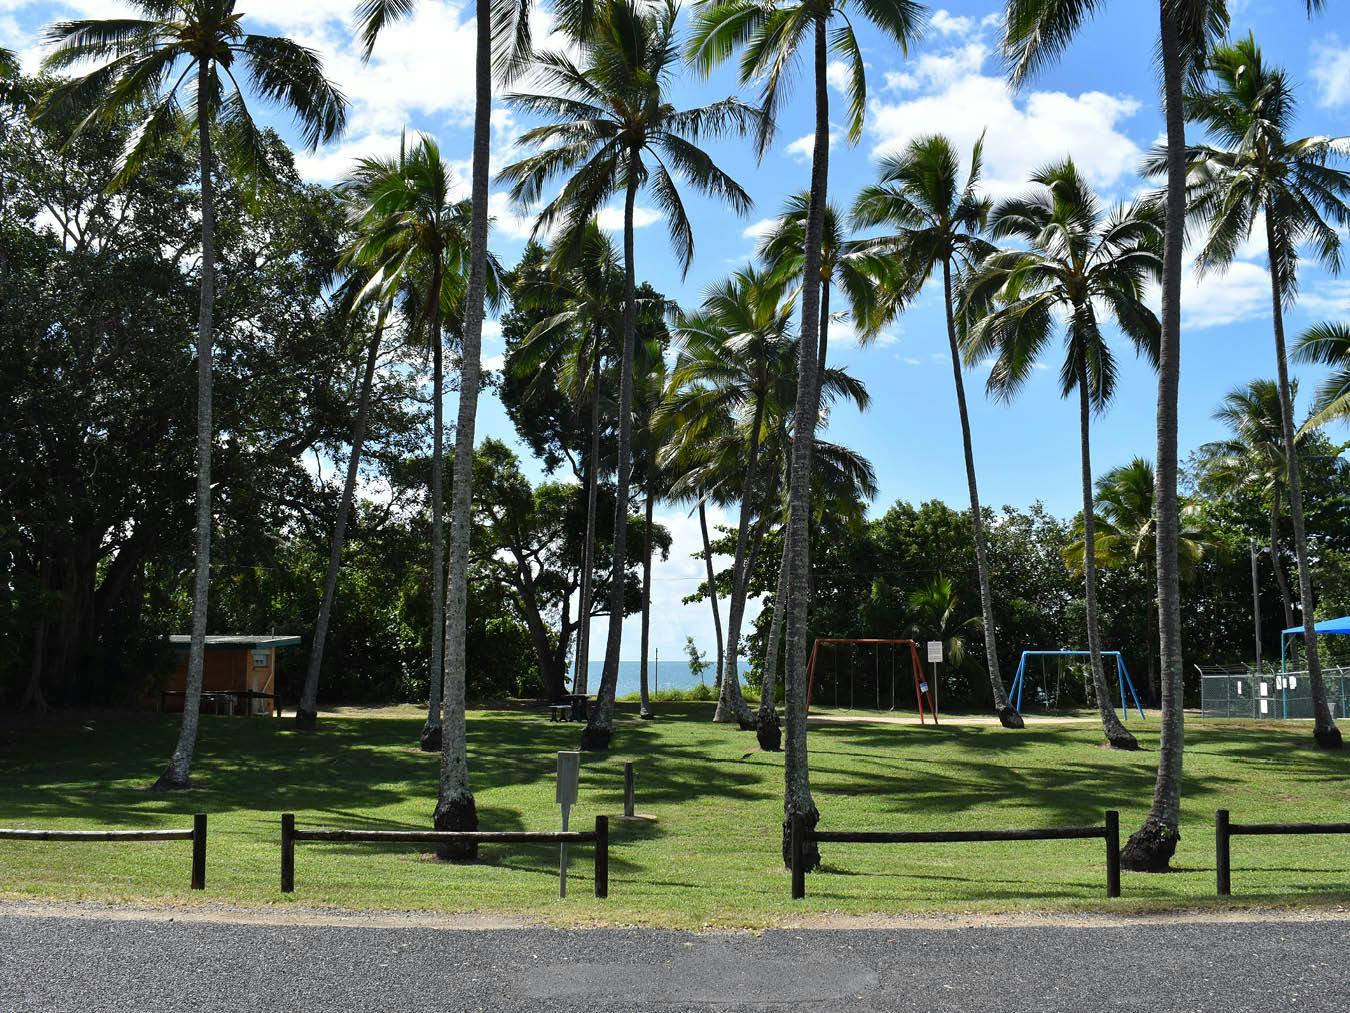 Intersection 3 - This photograph is looking north towards the beach. The wading pool and swings are visible on the right. The public toilet facilities are to the left.